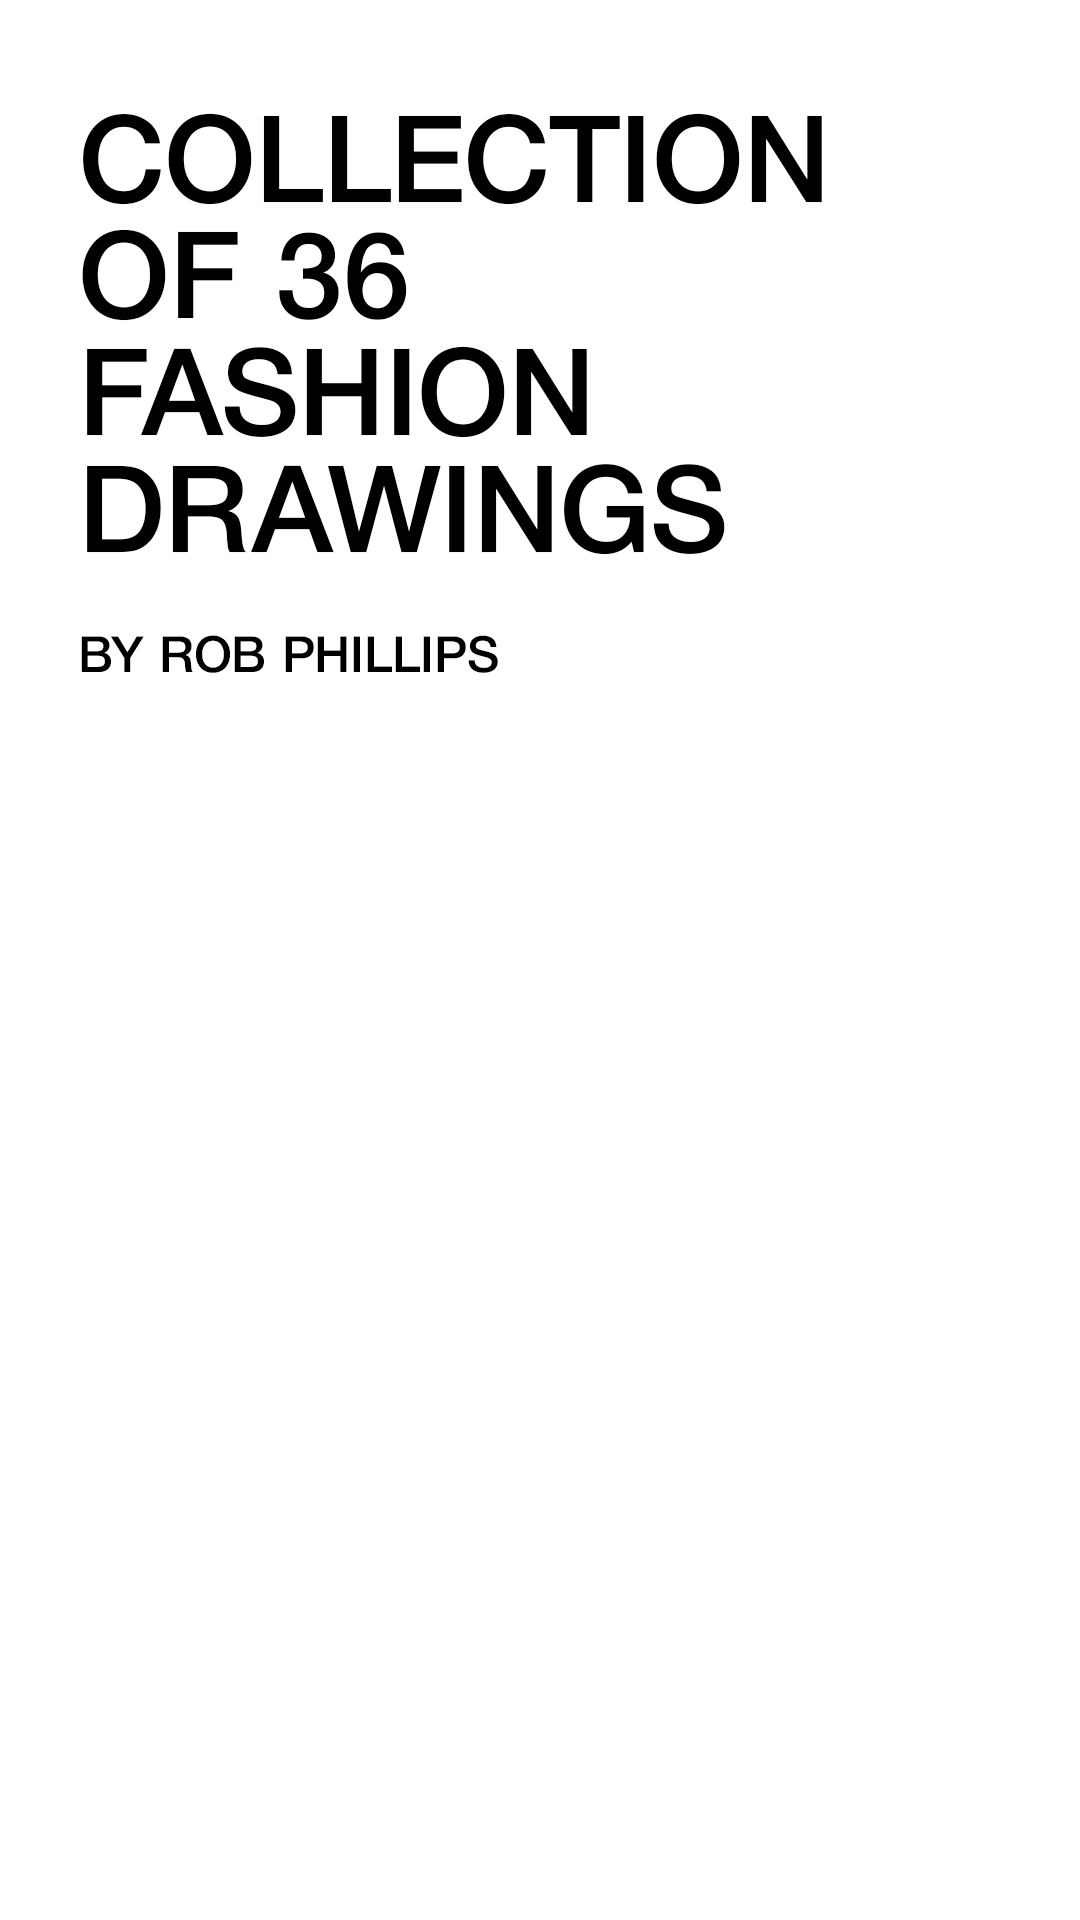 COLLECTION OF 36 FASHION DRAWINGS BY ROB PHILLIPS